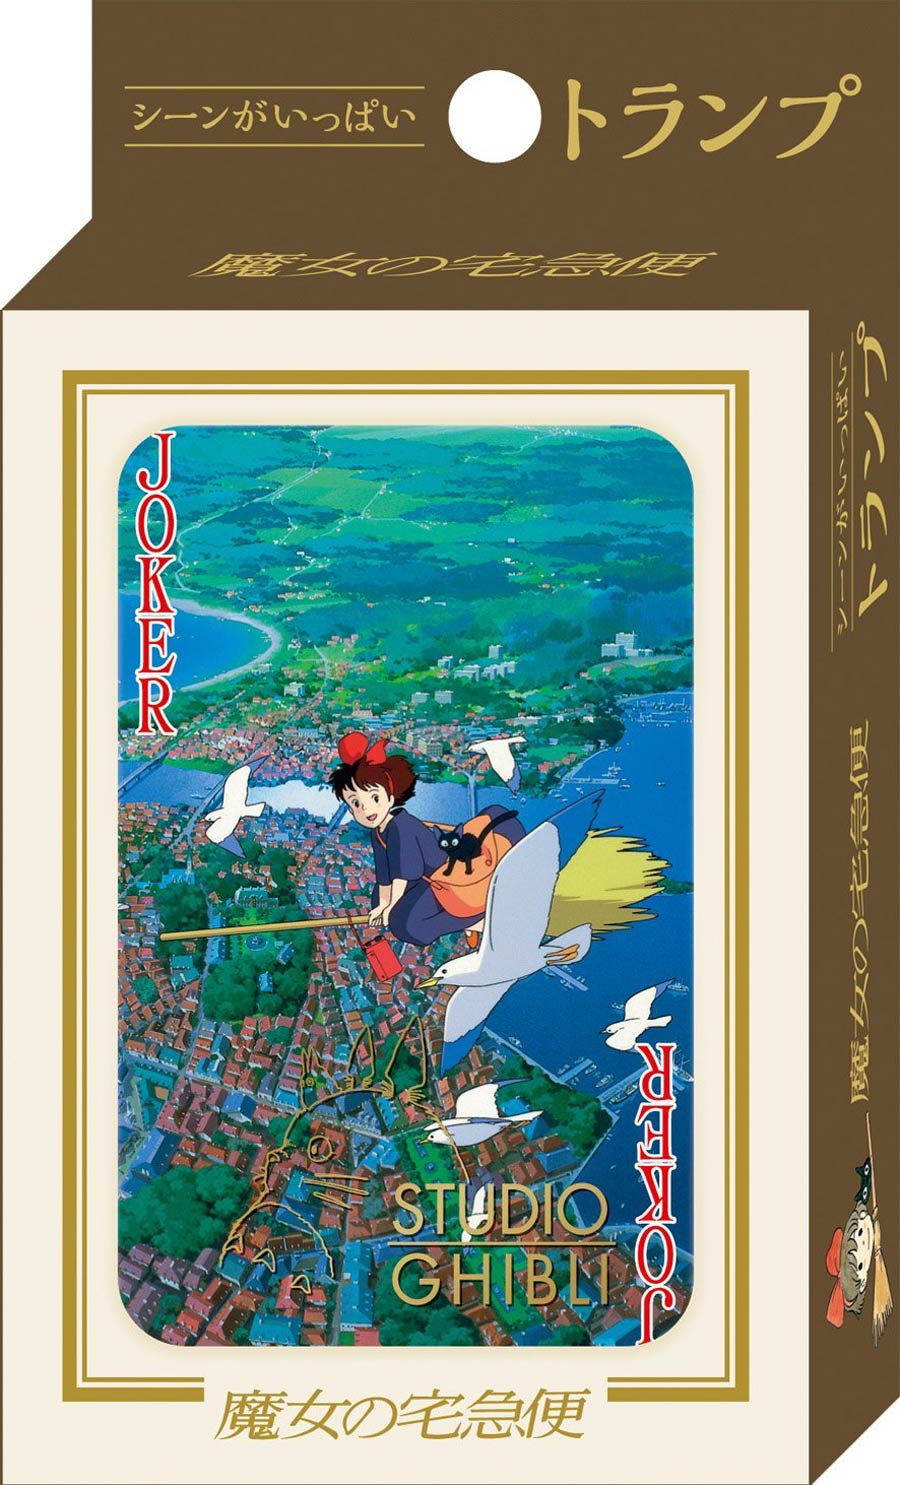 Kikis Delivery Service Playing Cards - Movie Scenes